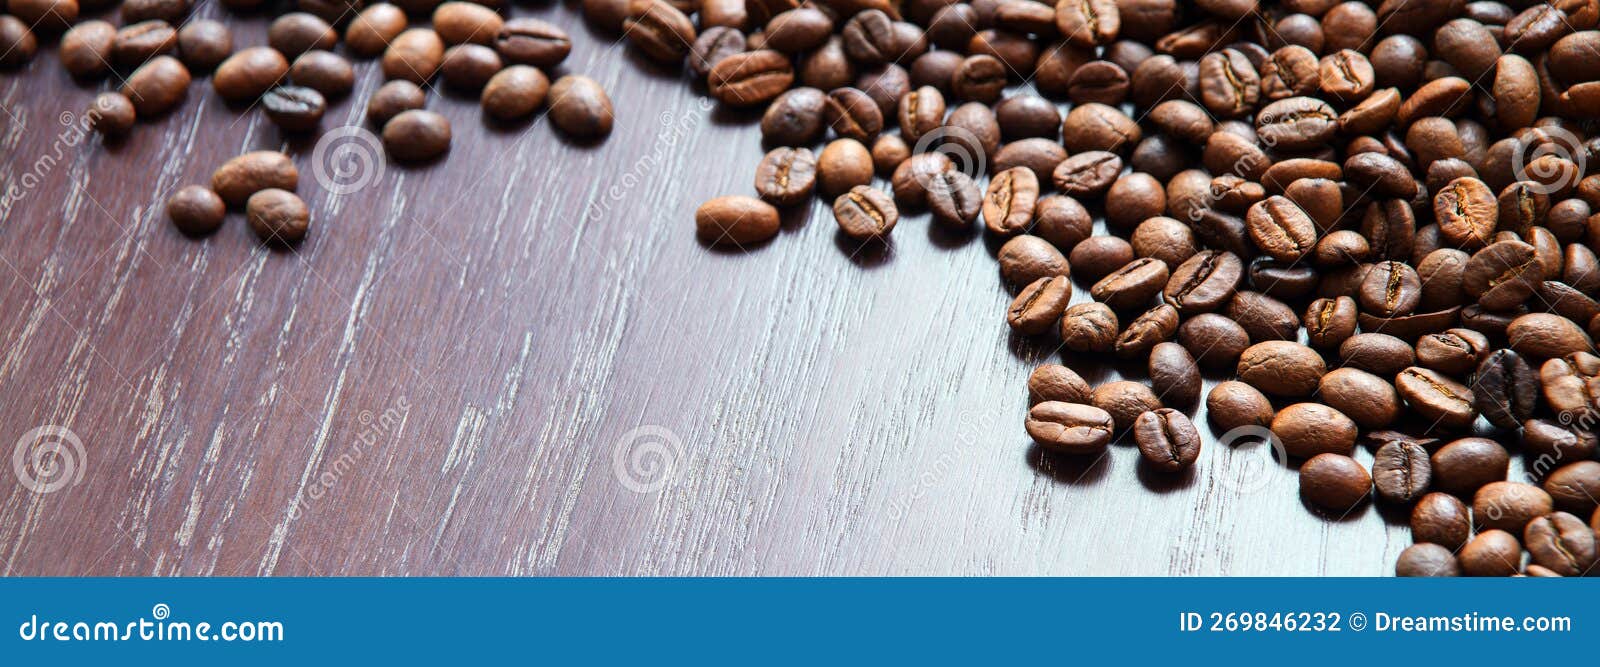 coffee grains on a wooden table